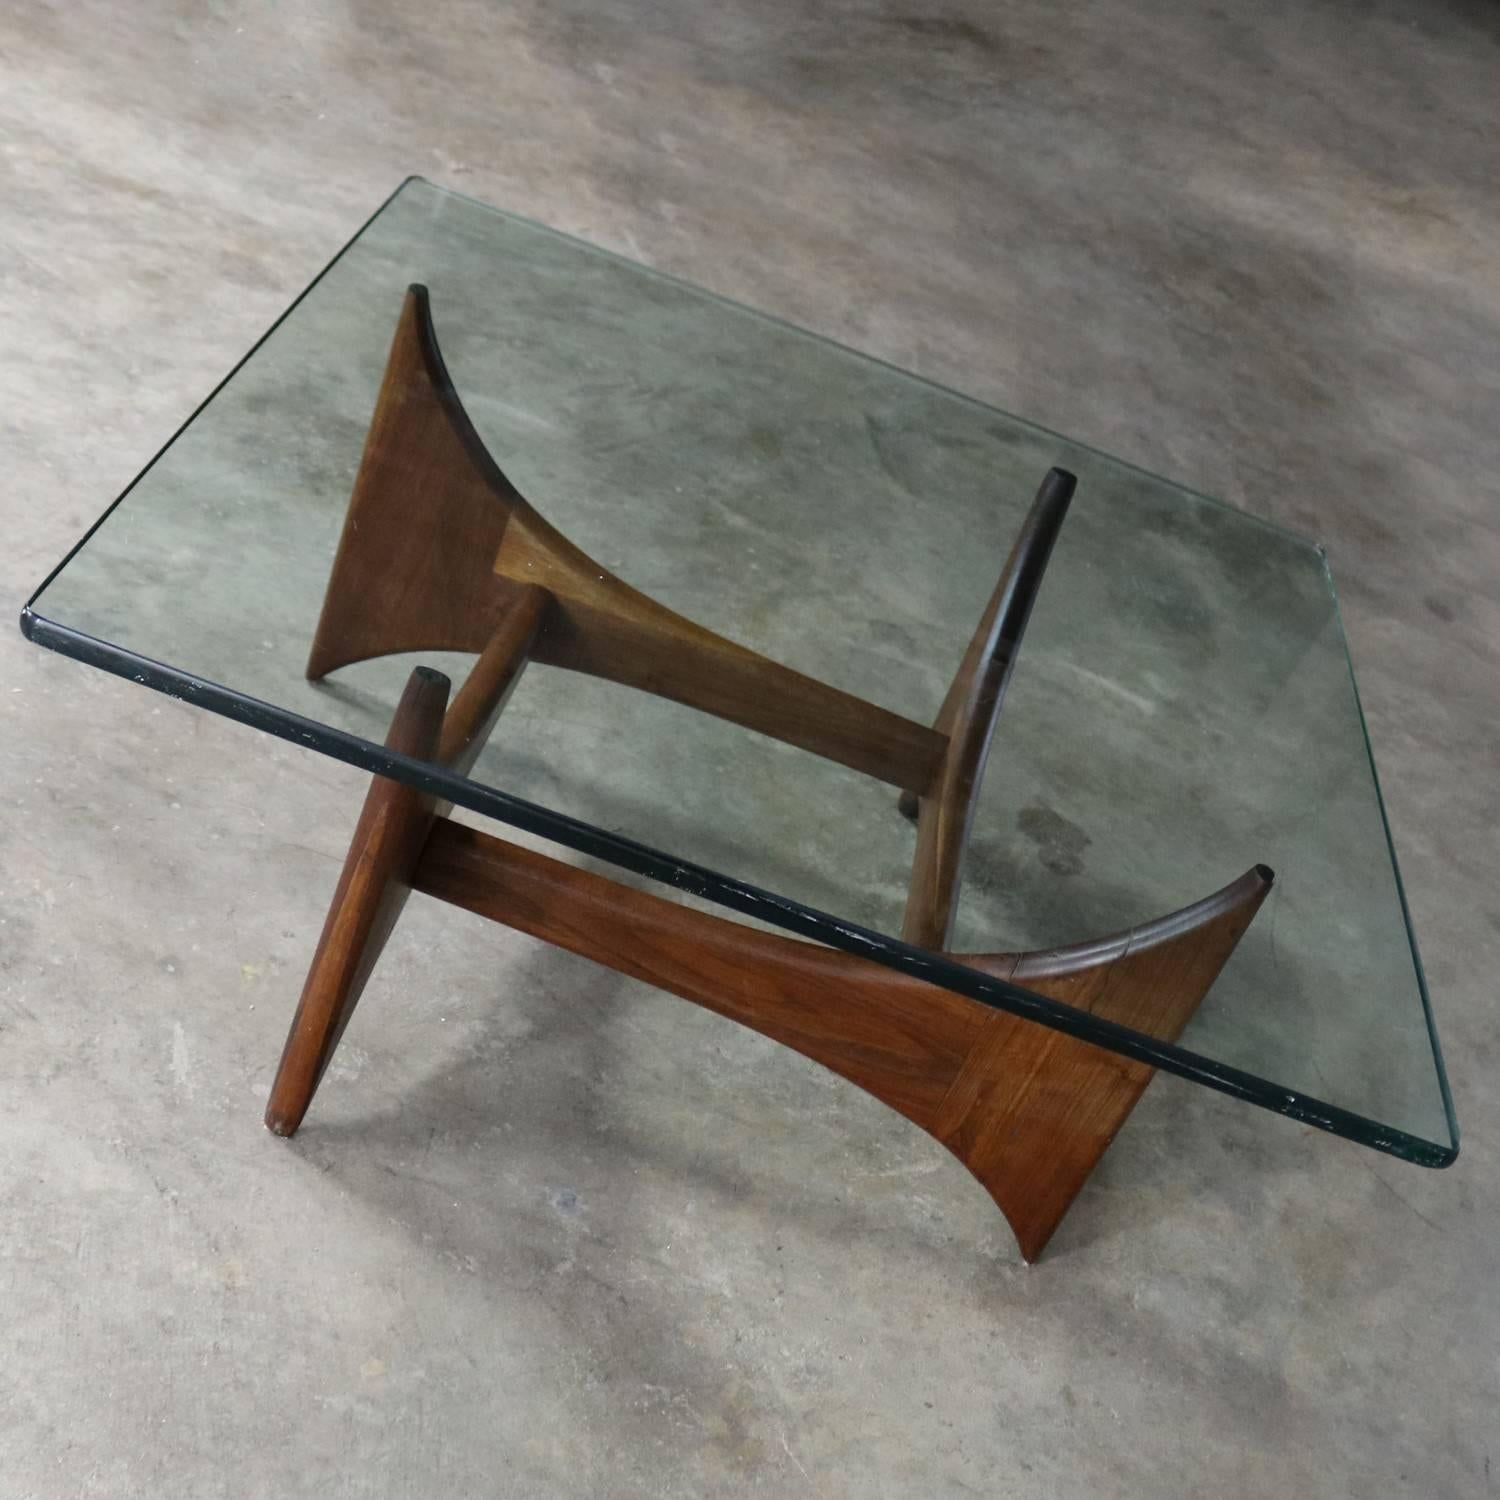 Adrian Pearsall Walnut and Glass Sculptural Cocktail Table for Craft Associates 1